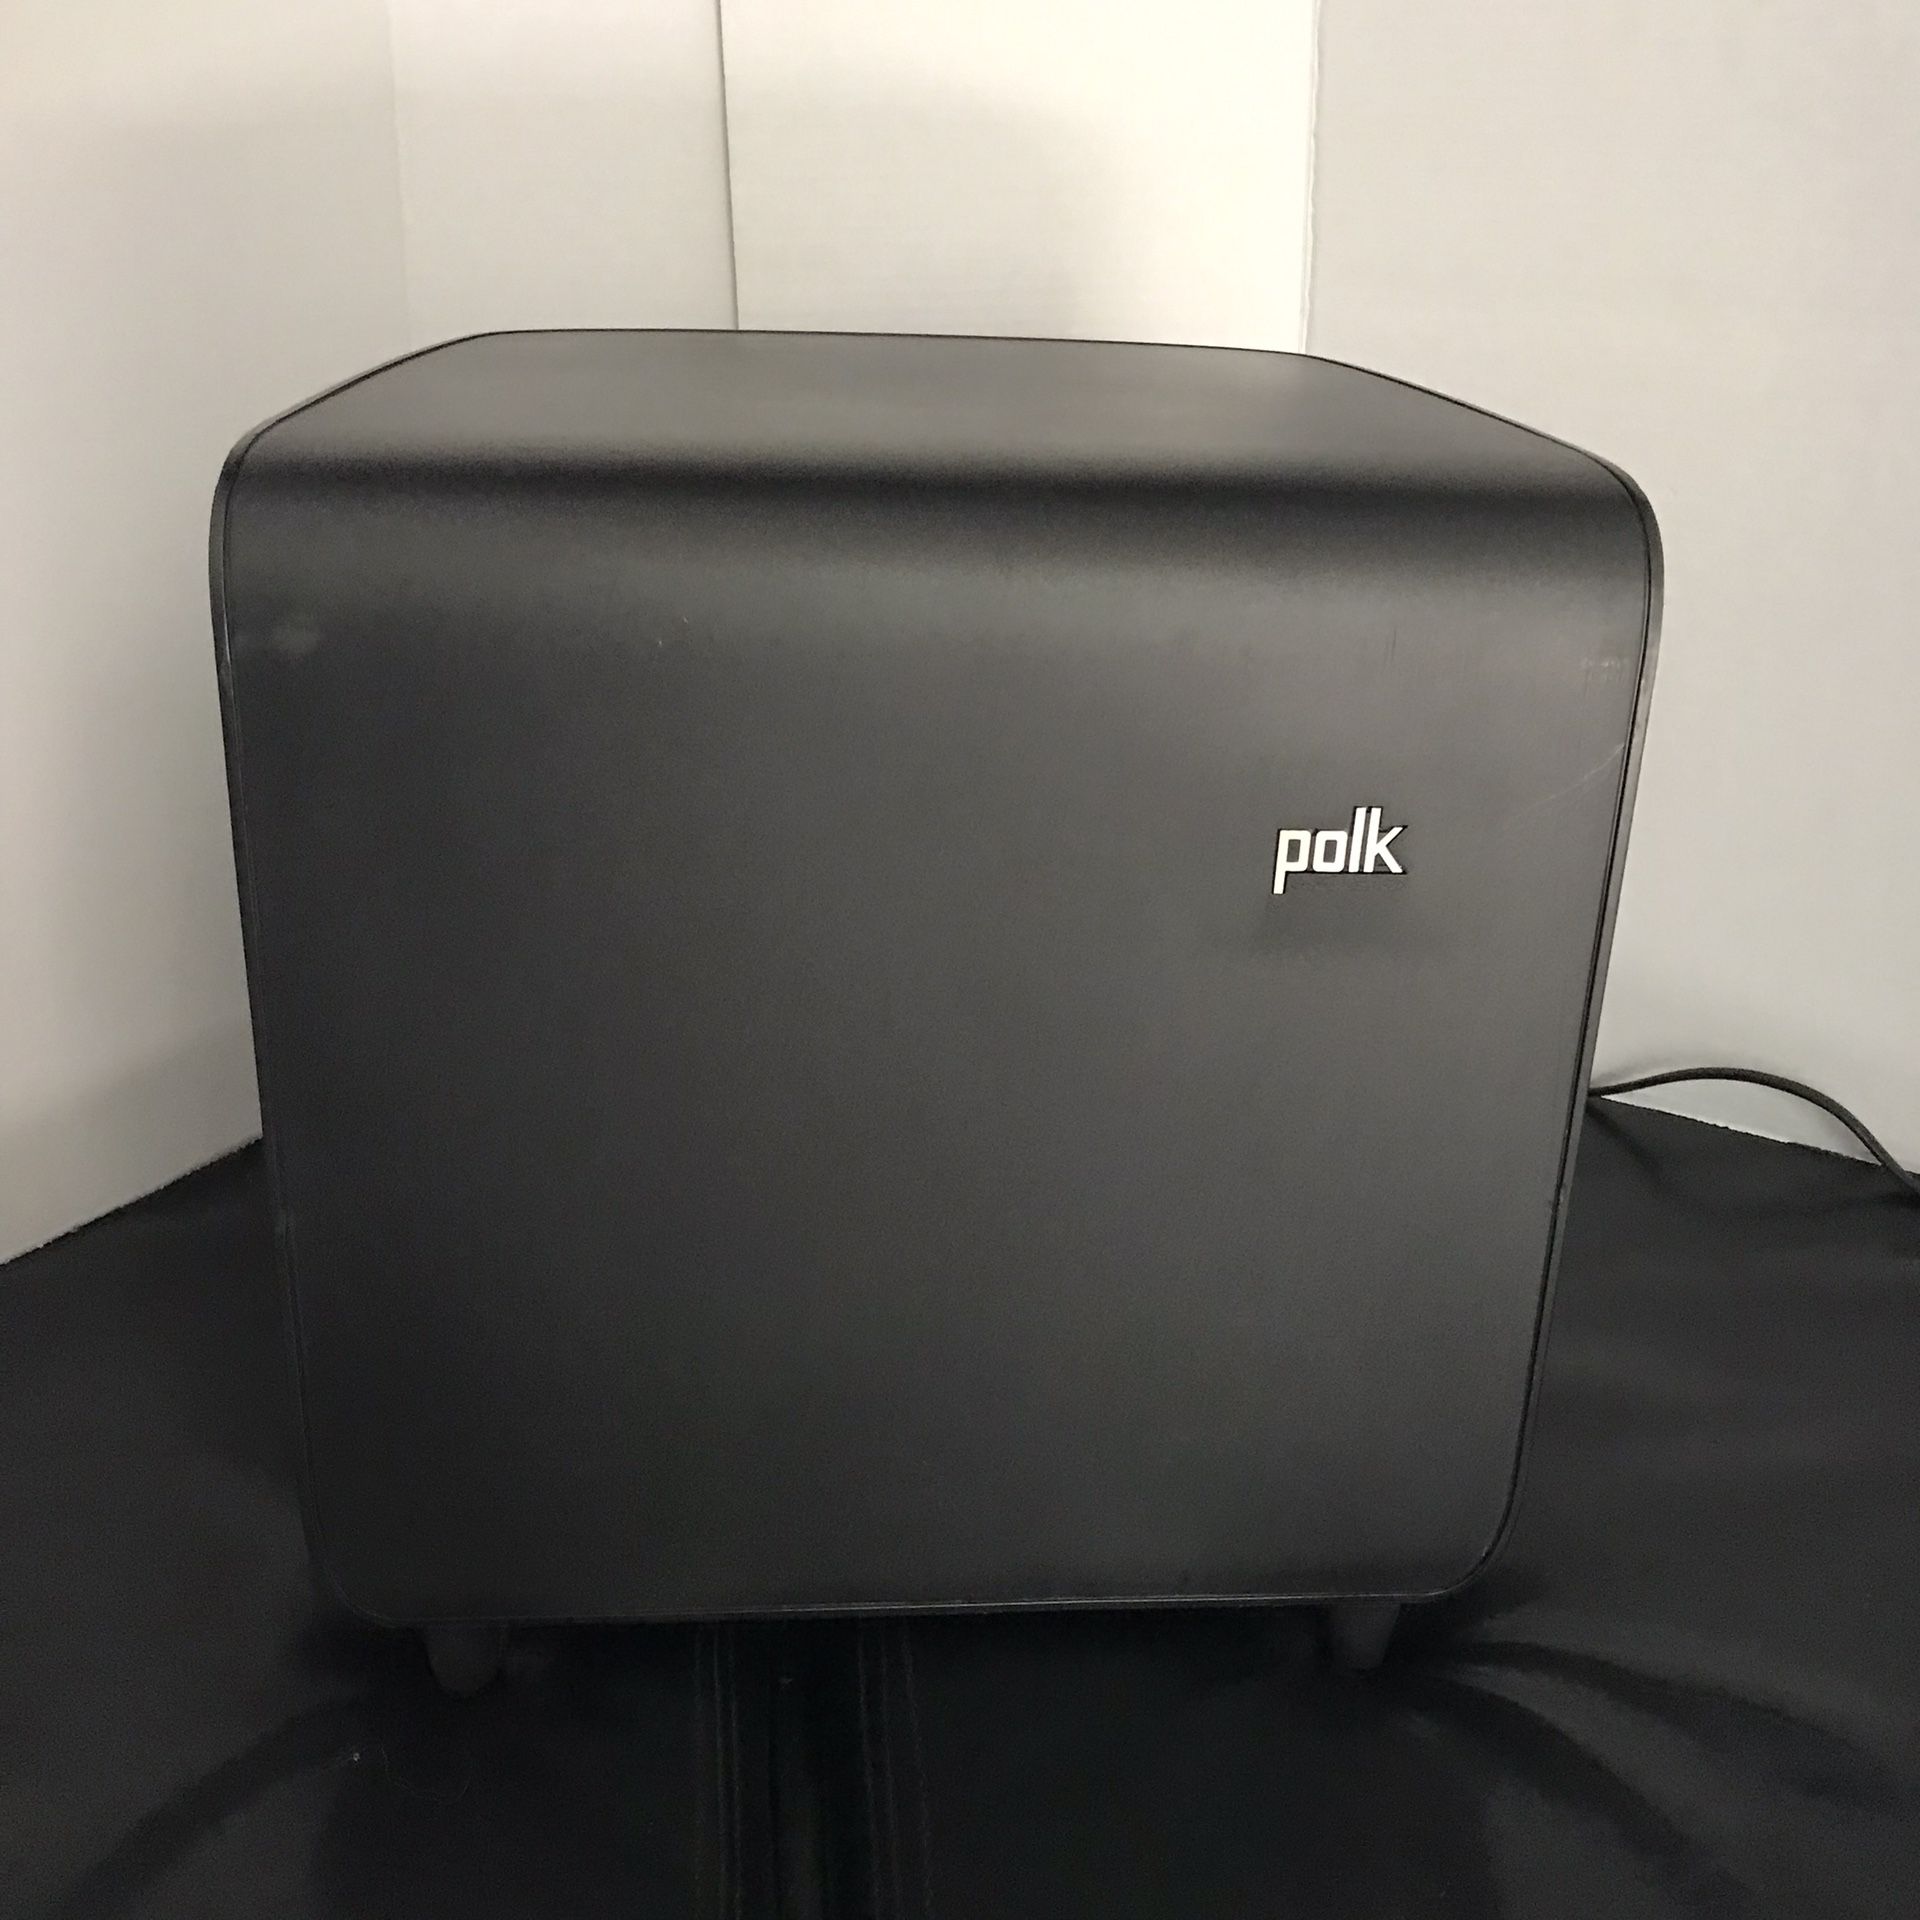 Polk Audio Omni SB1 Plus Sub Home Subwoofer * For Use With Sb1 Sound Bar System.  ***SELLING SUBWOOFER ONLY***